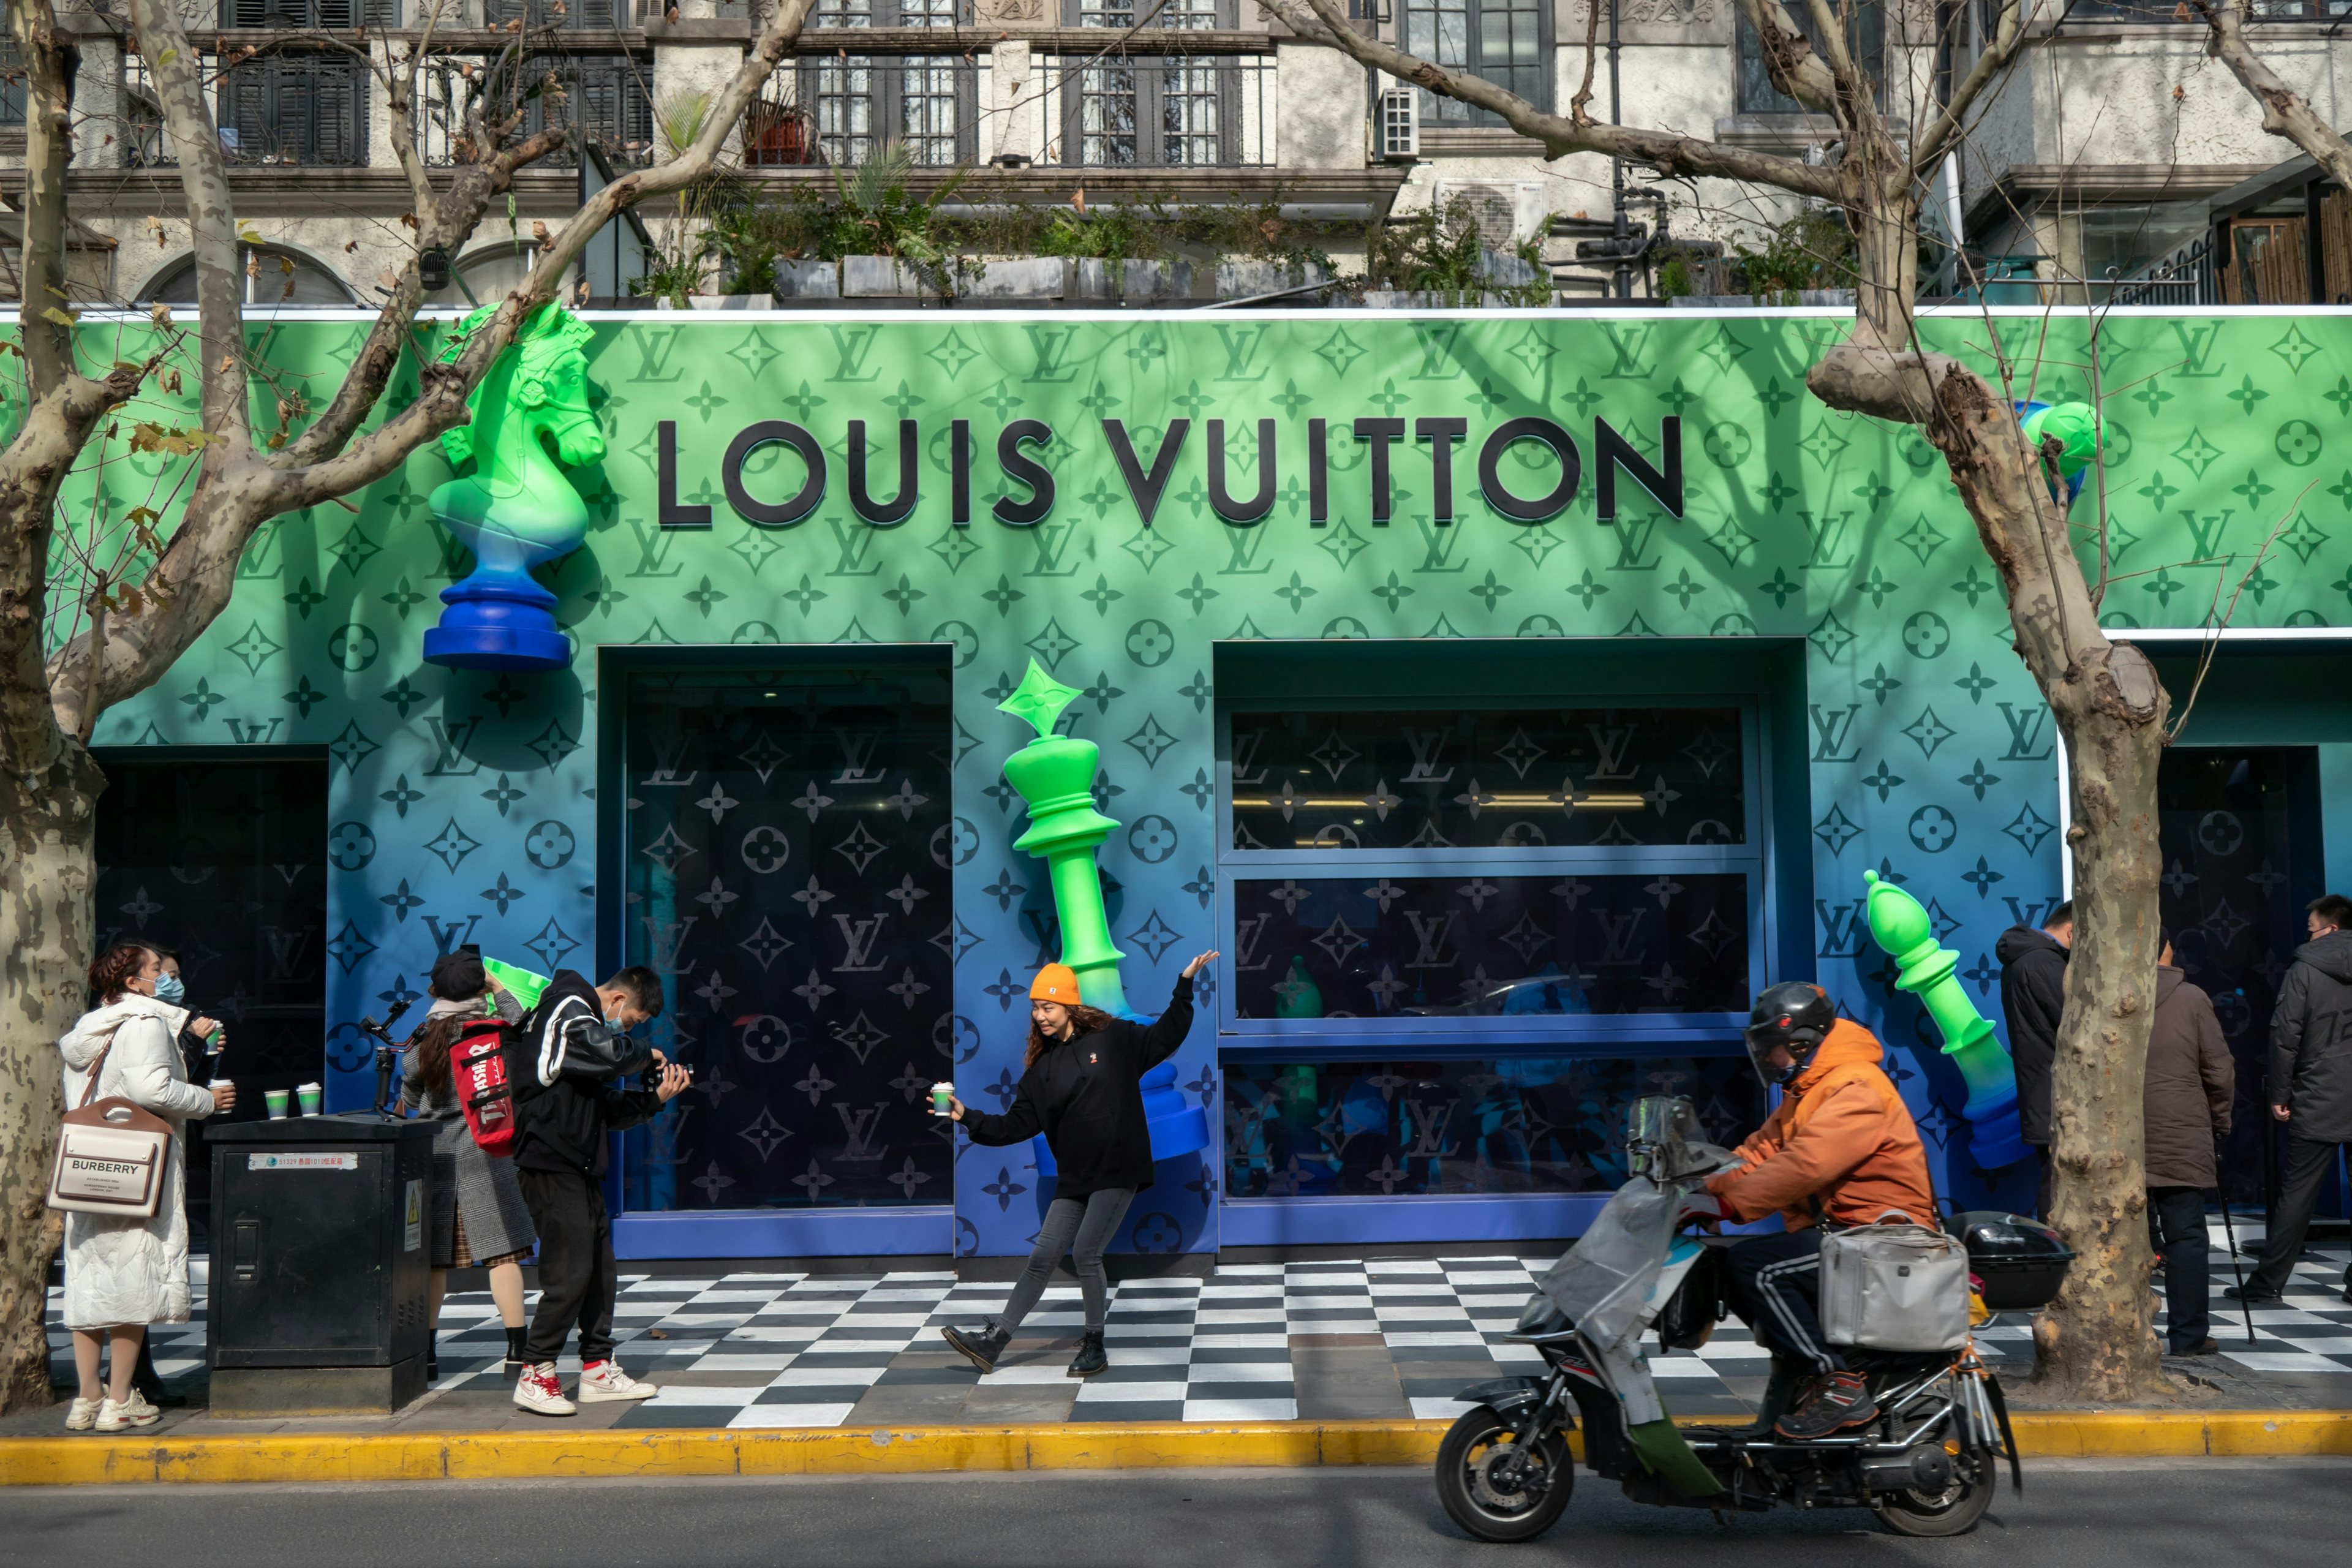 People outside a Louis Vuitton store in China.  